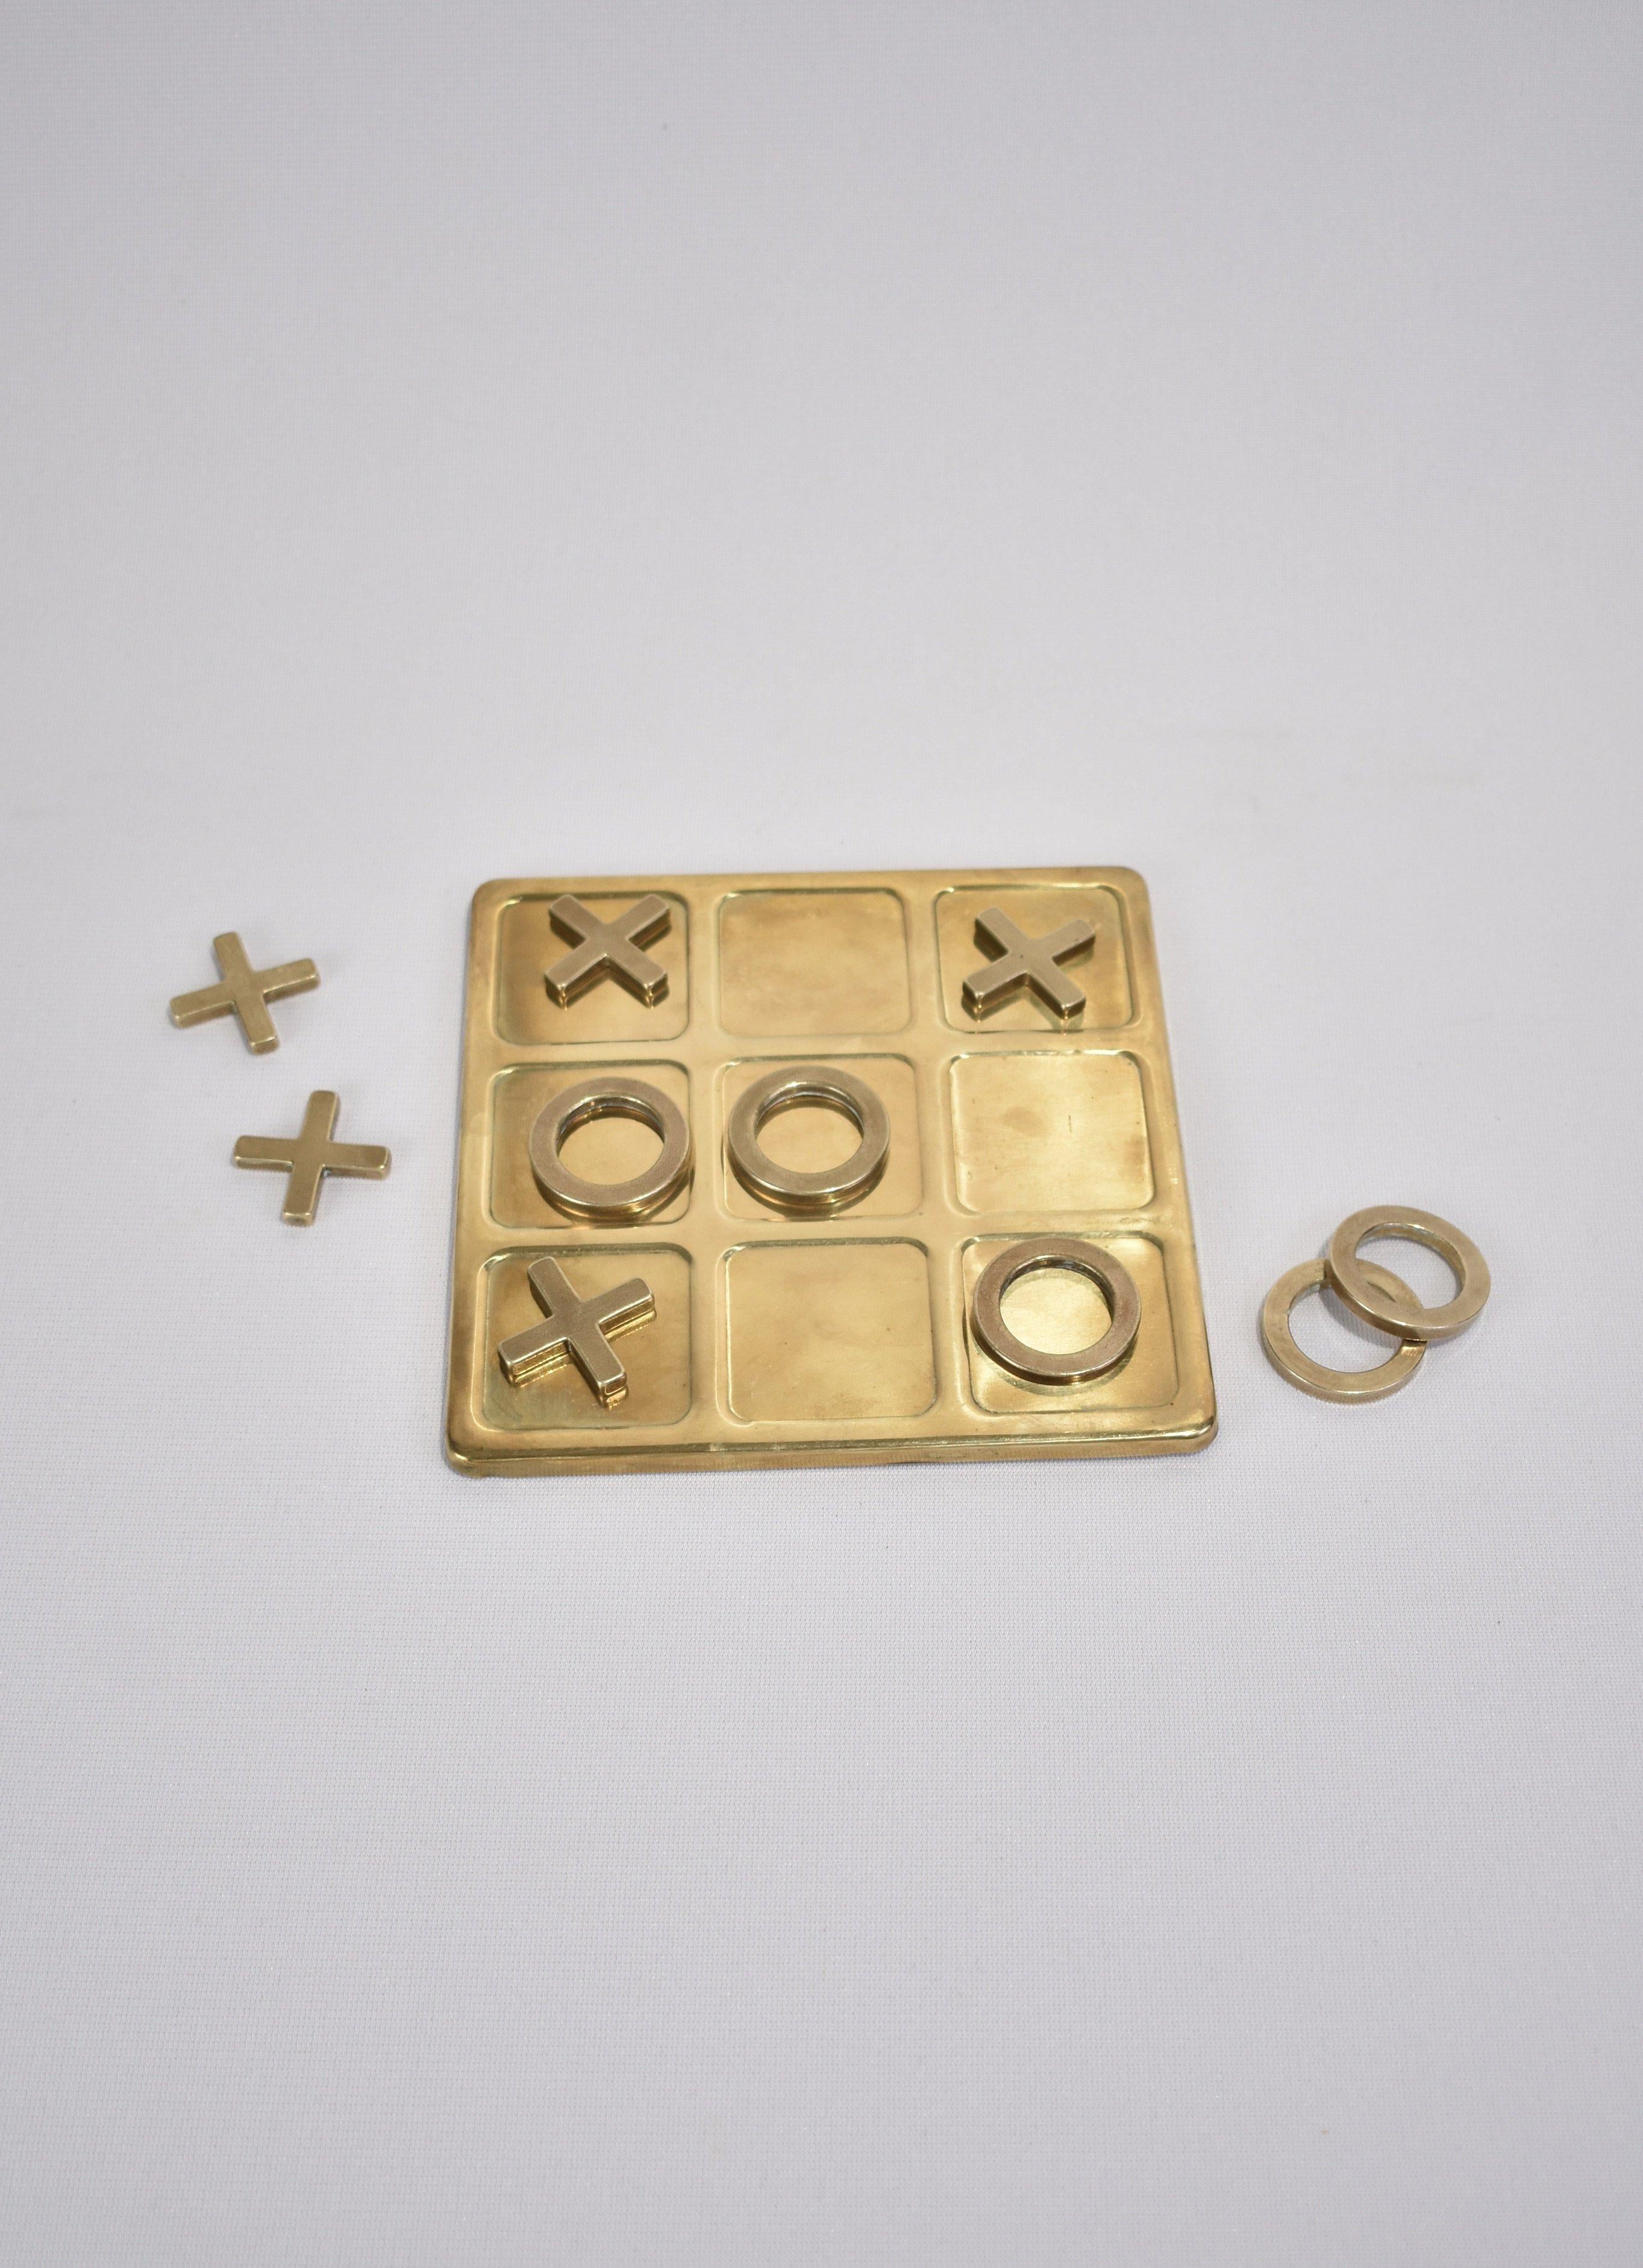 Vintage, brass tic-tac-toe set including board and ten pieces.